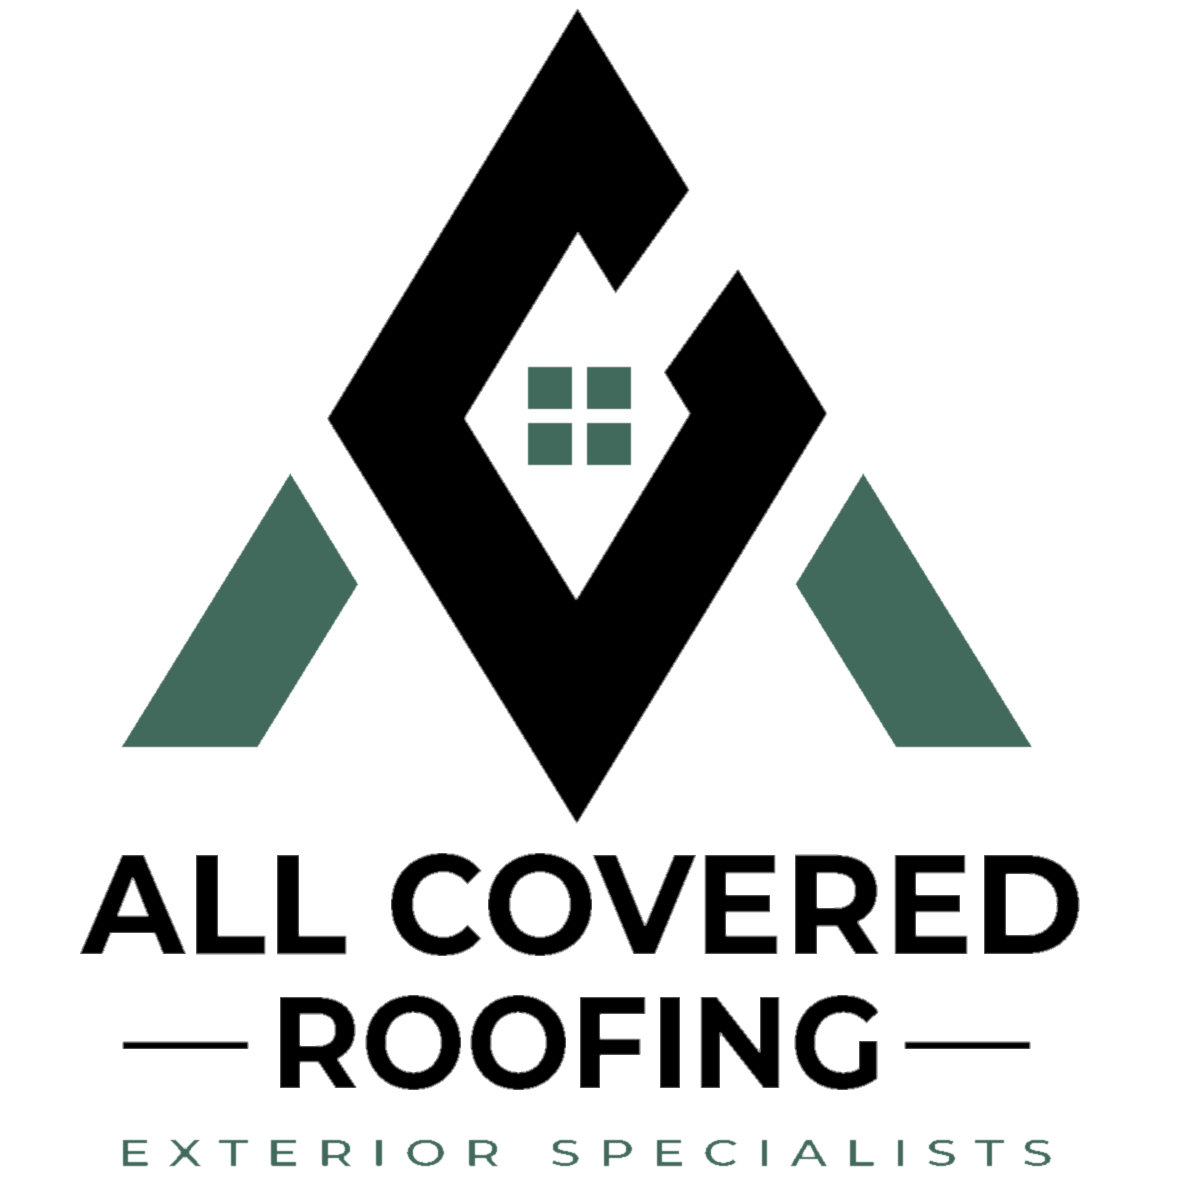 All Covered Roofing & Exteriors